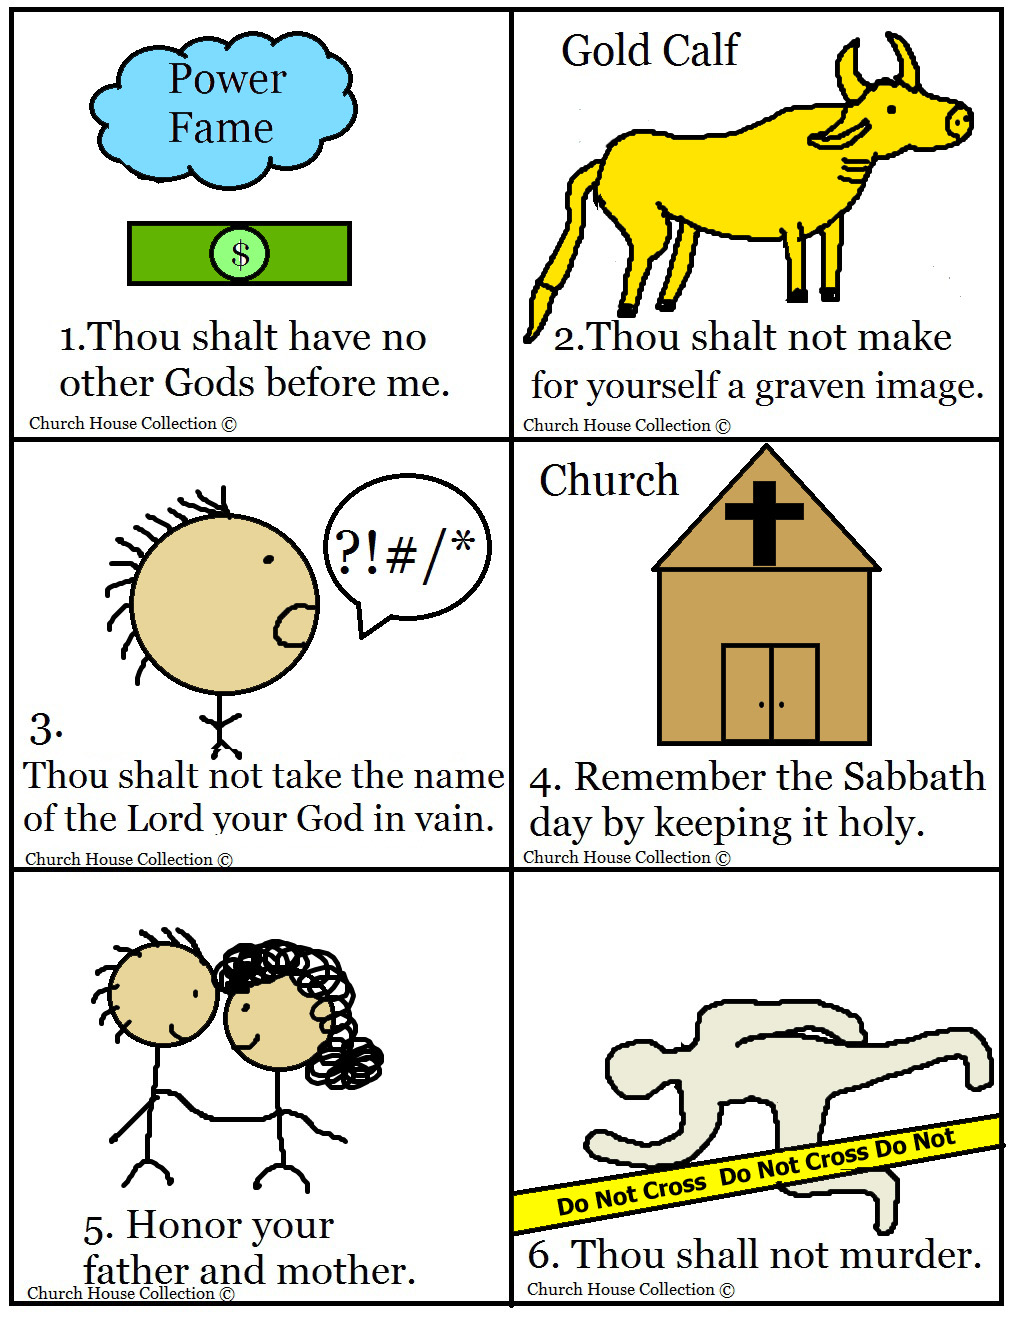 Church House Collection Blog 10 Commandments Bible Matching Game 